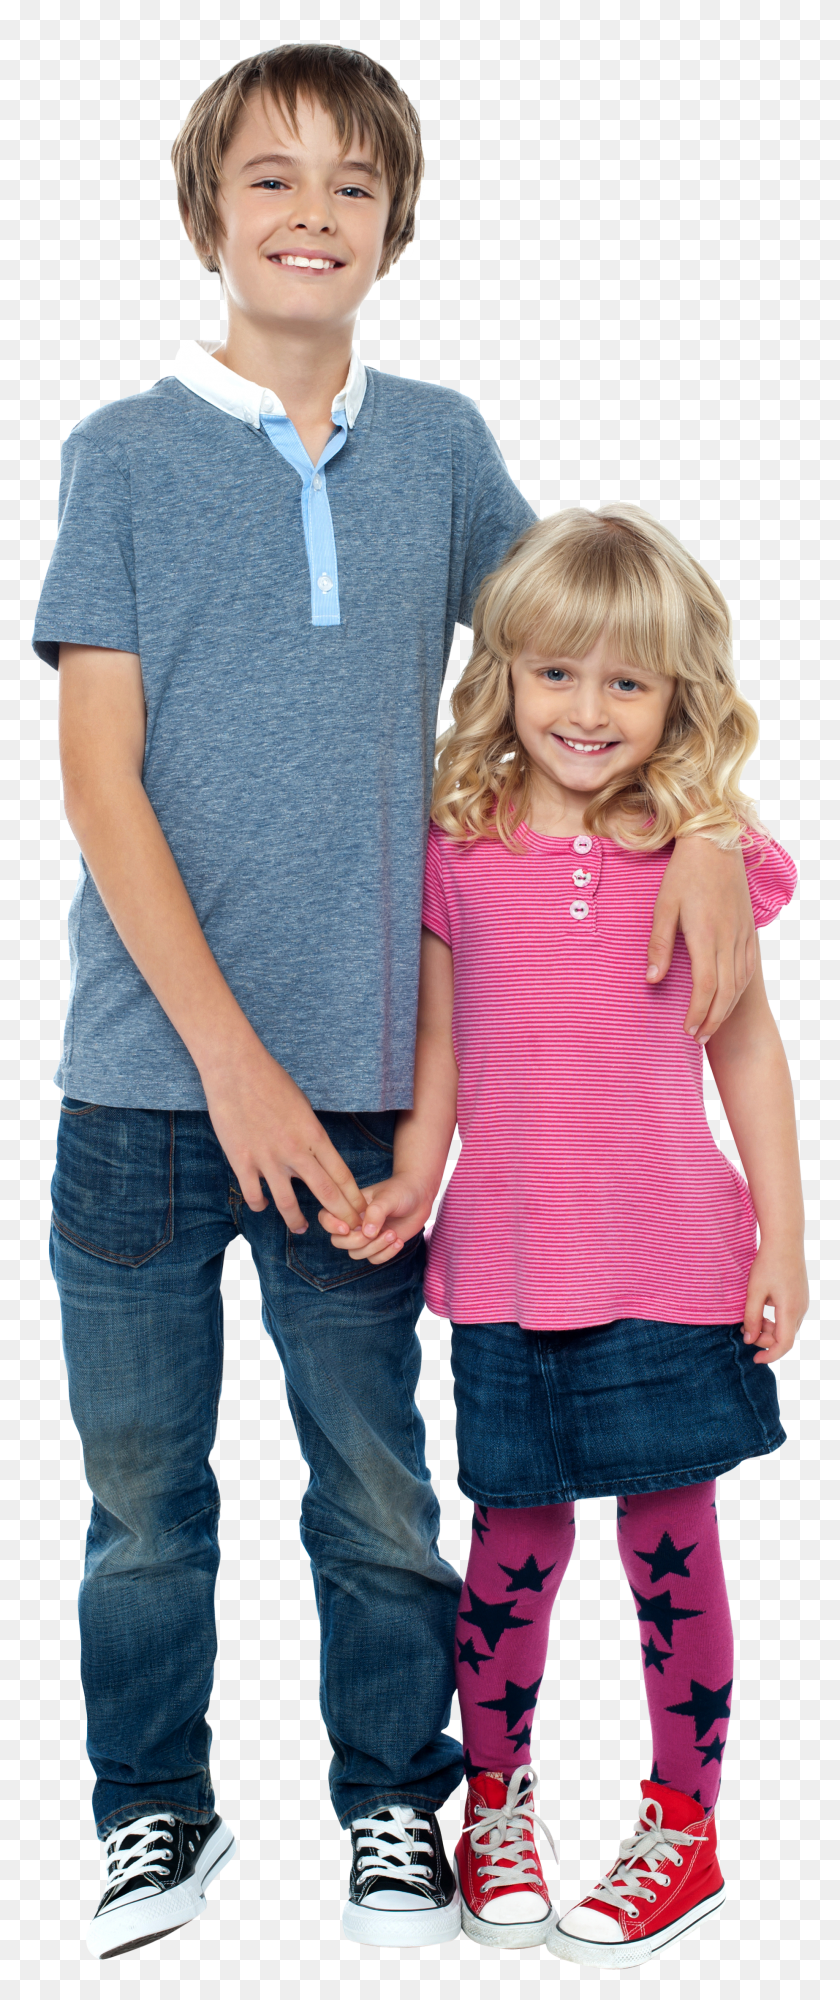 1847x4595 Boy And Girl Royalty Free Image Stock Photography HD PNG Download